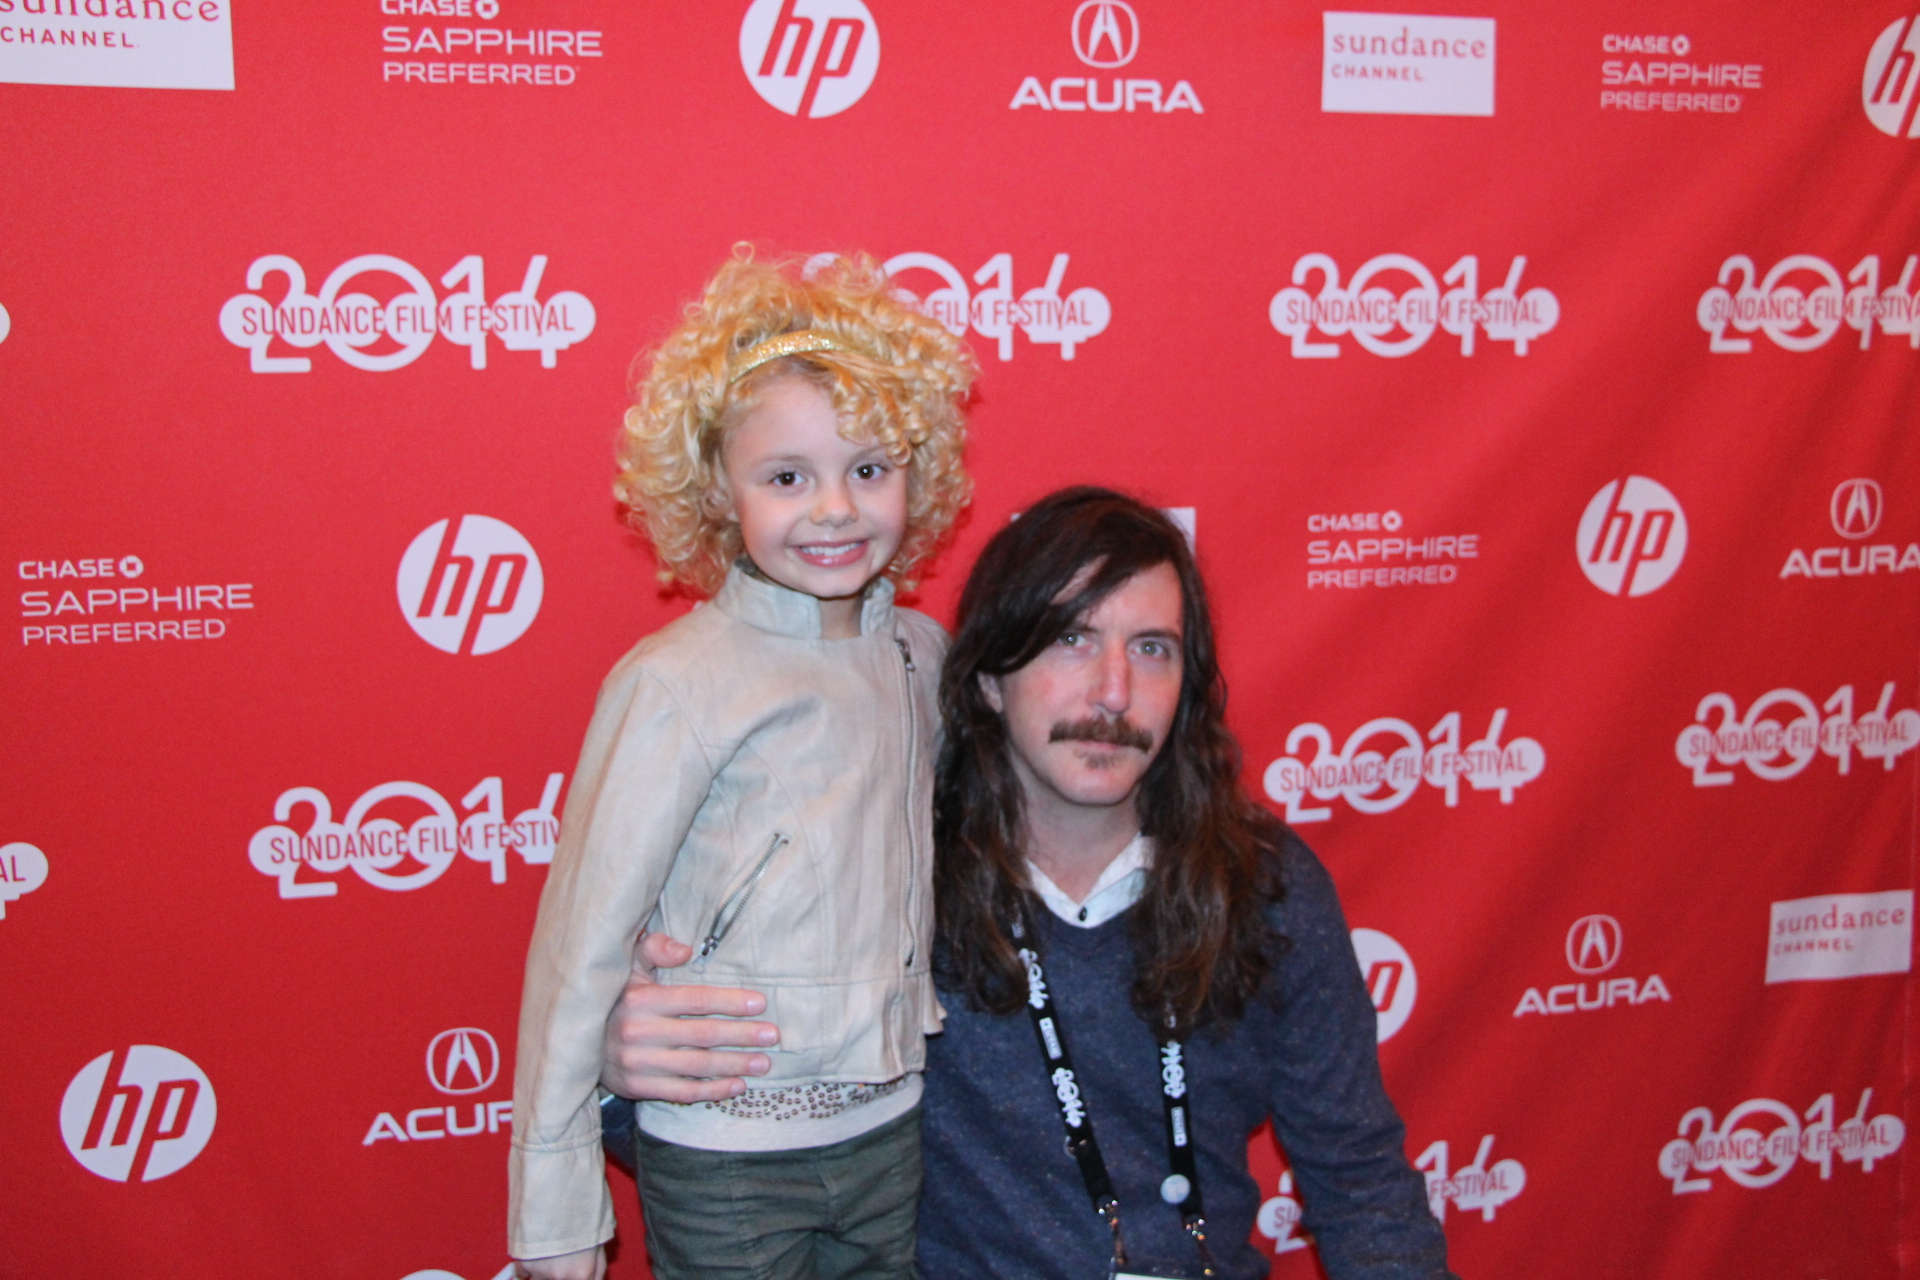 At Sundance Film Festival DIG Director Toby Halbrooks with DIG lead Mallory James Mahoney